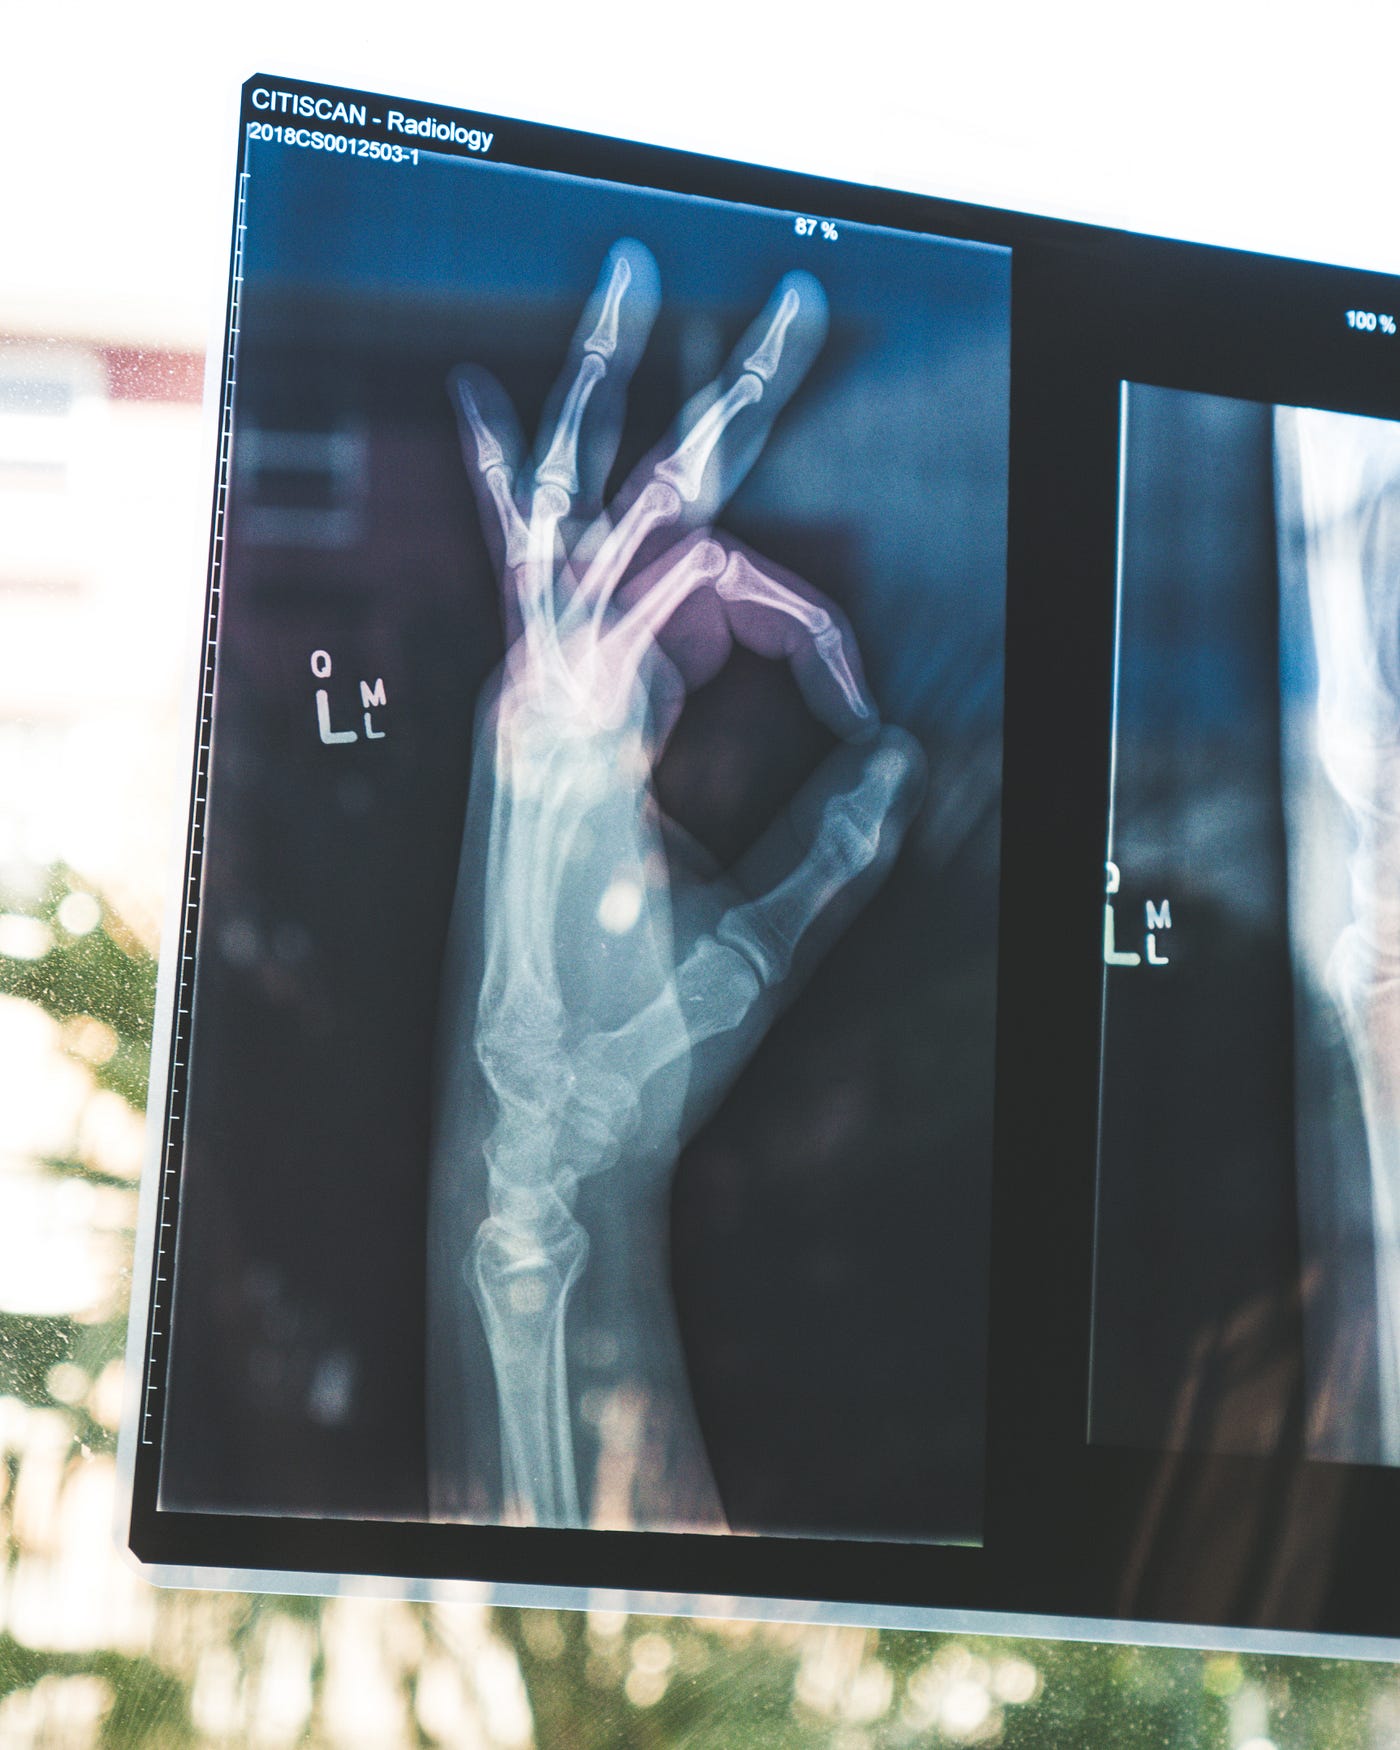 Plain films (single view X-ray) of a left hand making an “okay” sign.